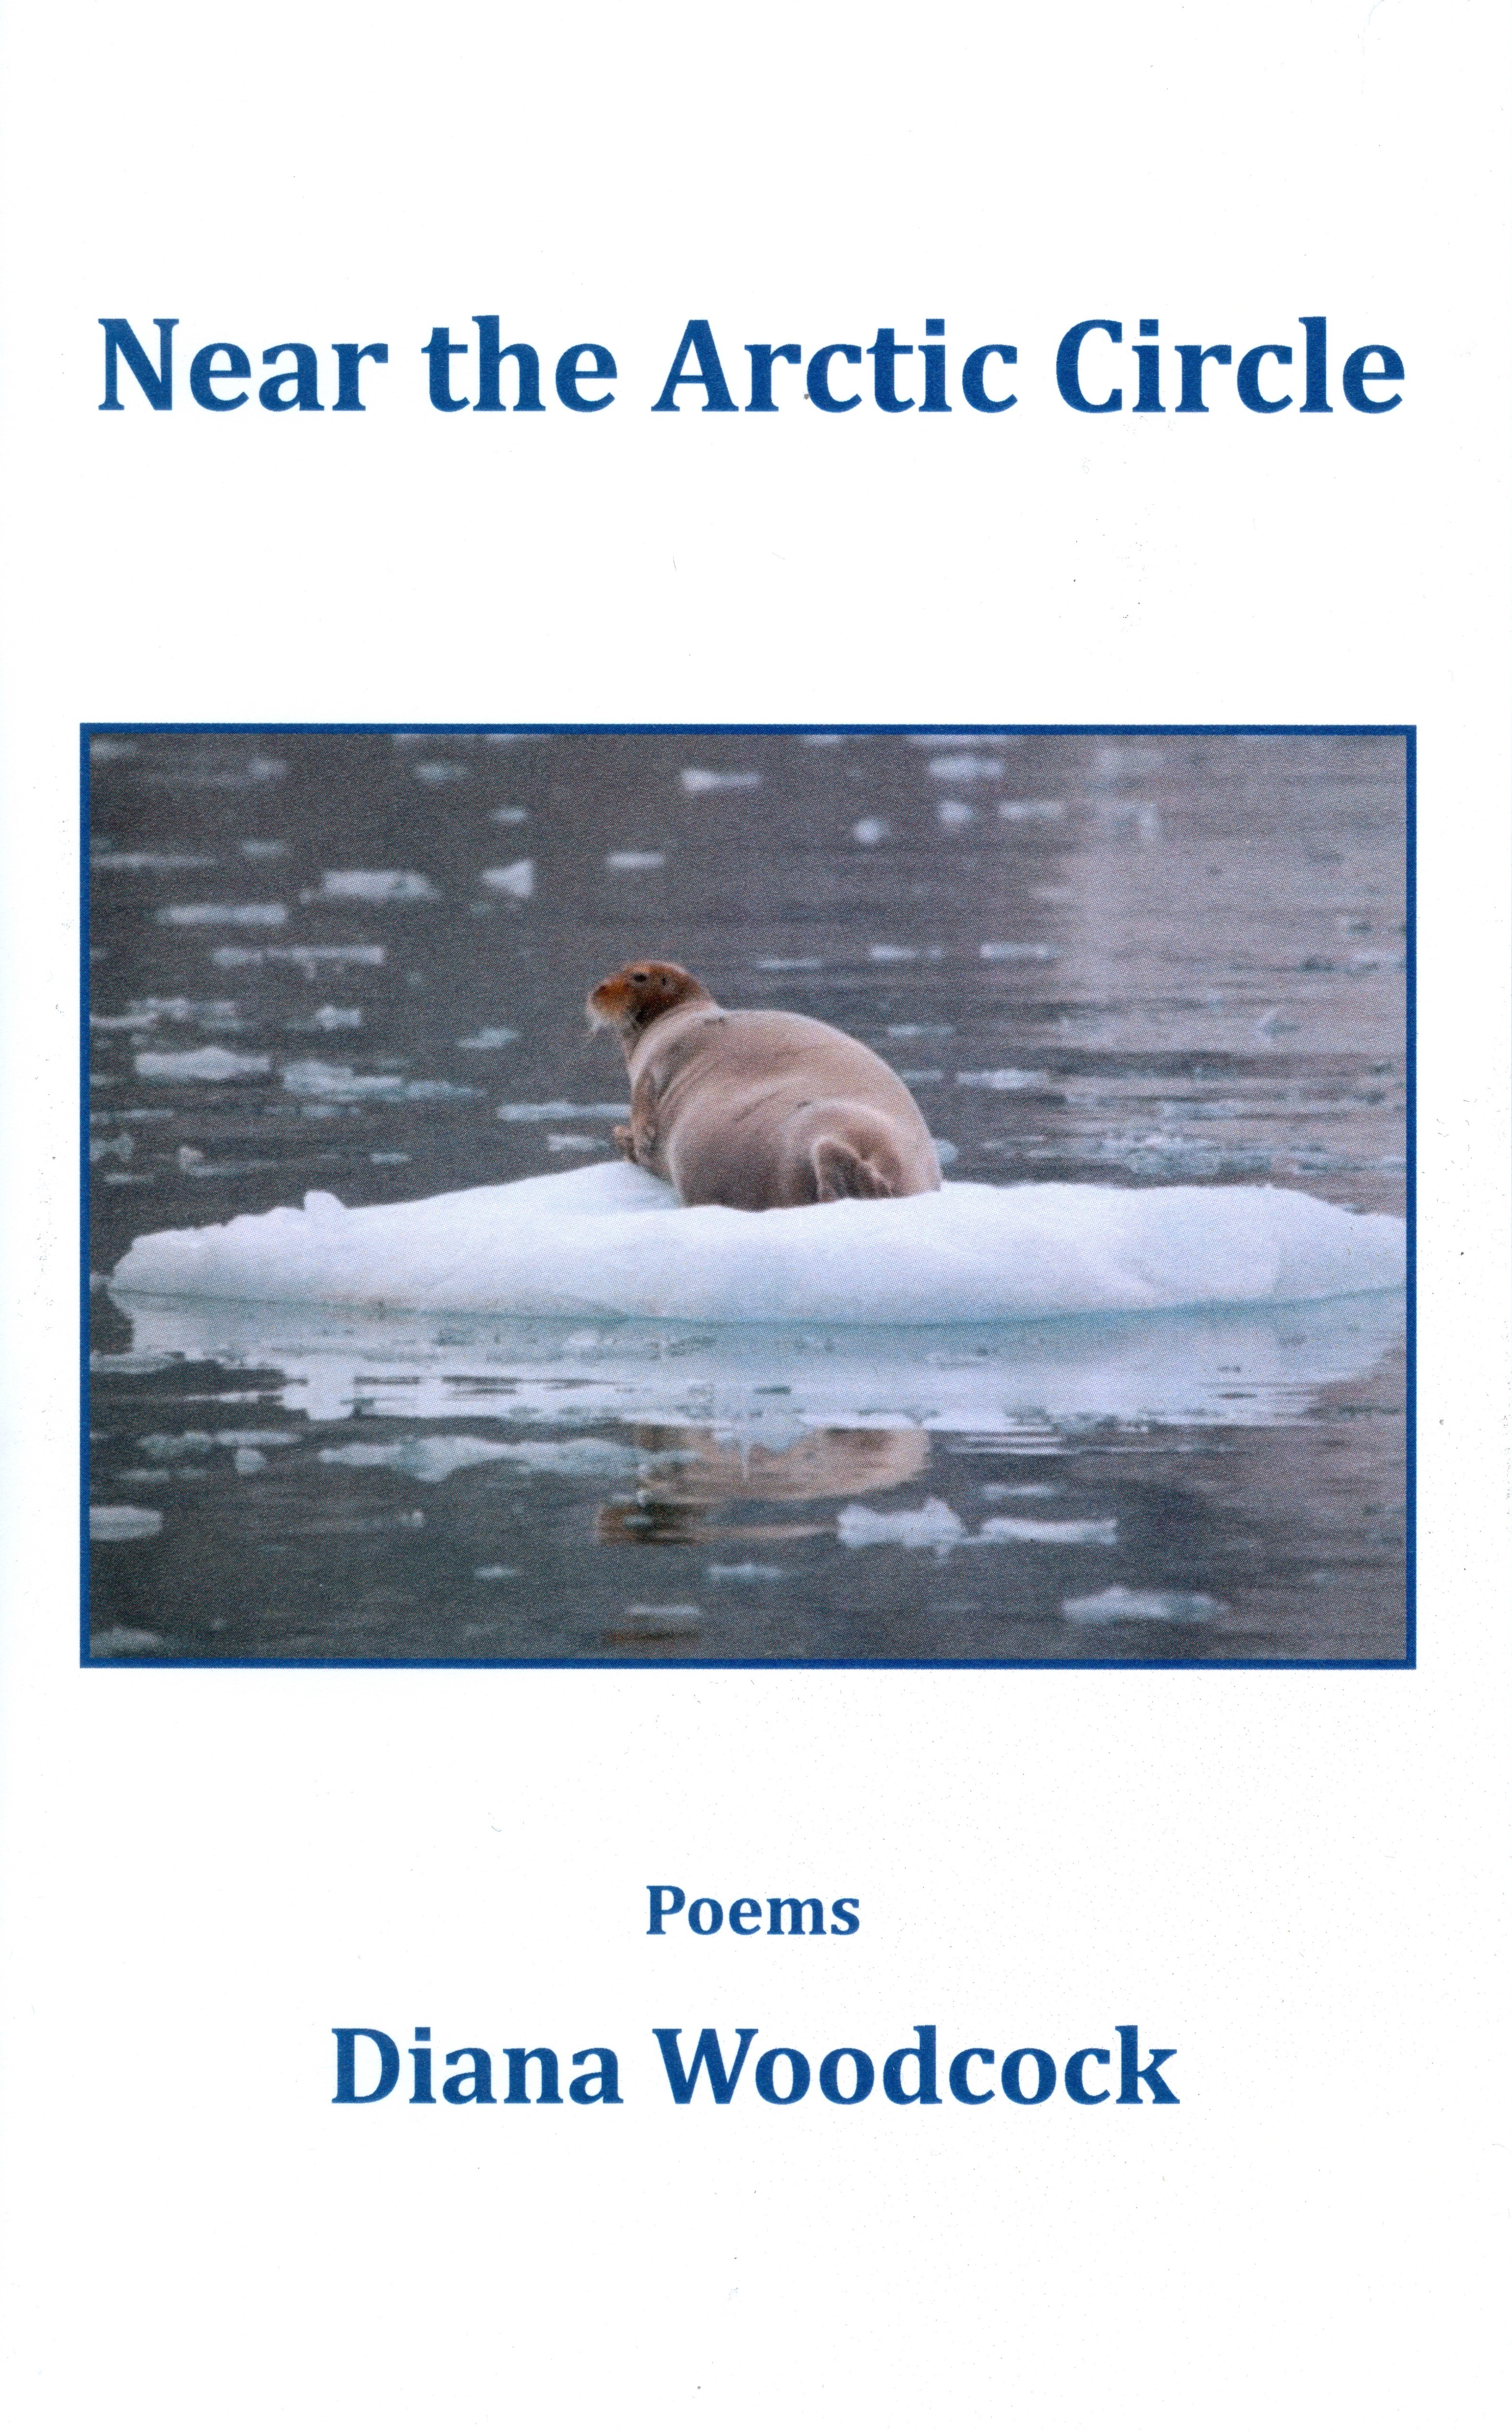 Book cover of NEAR THE ARCTIC CIRCLE by Dr. Diana Woodcock features a seal floating on a raft piece of ice.